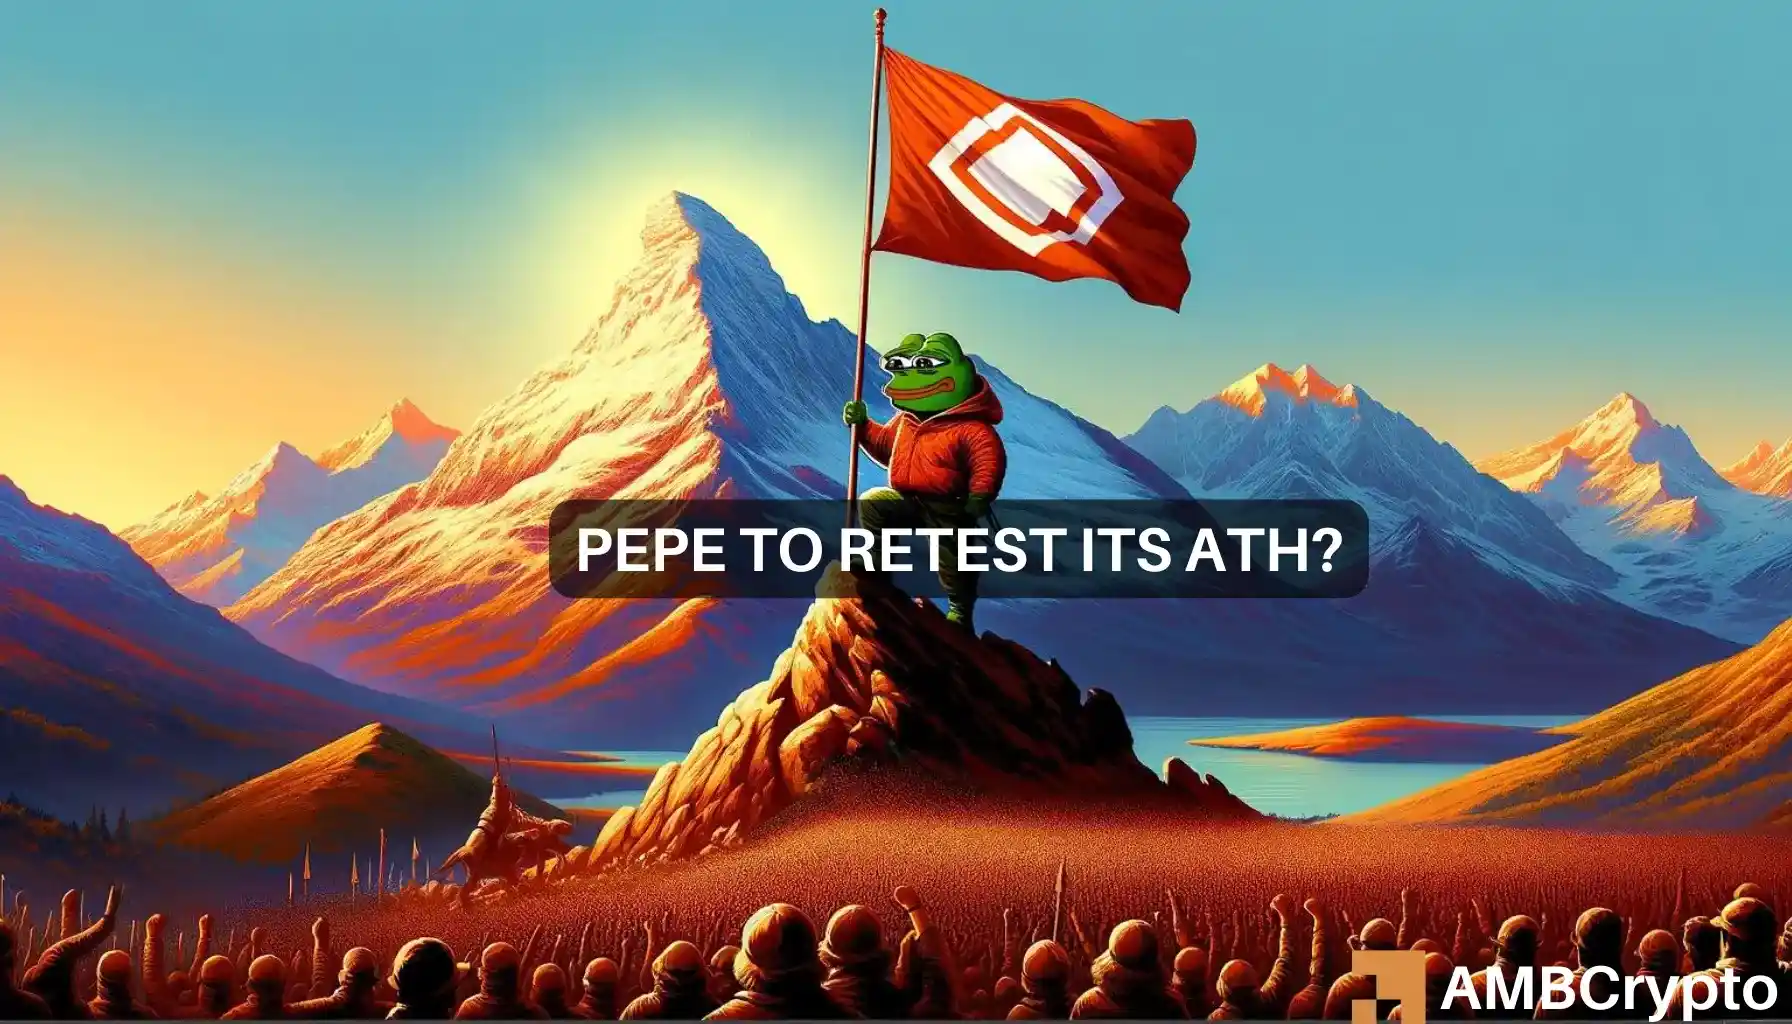 PEPE to hit new ATH? YES, but only if these conditions are met…